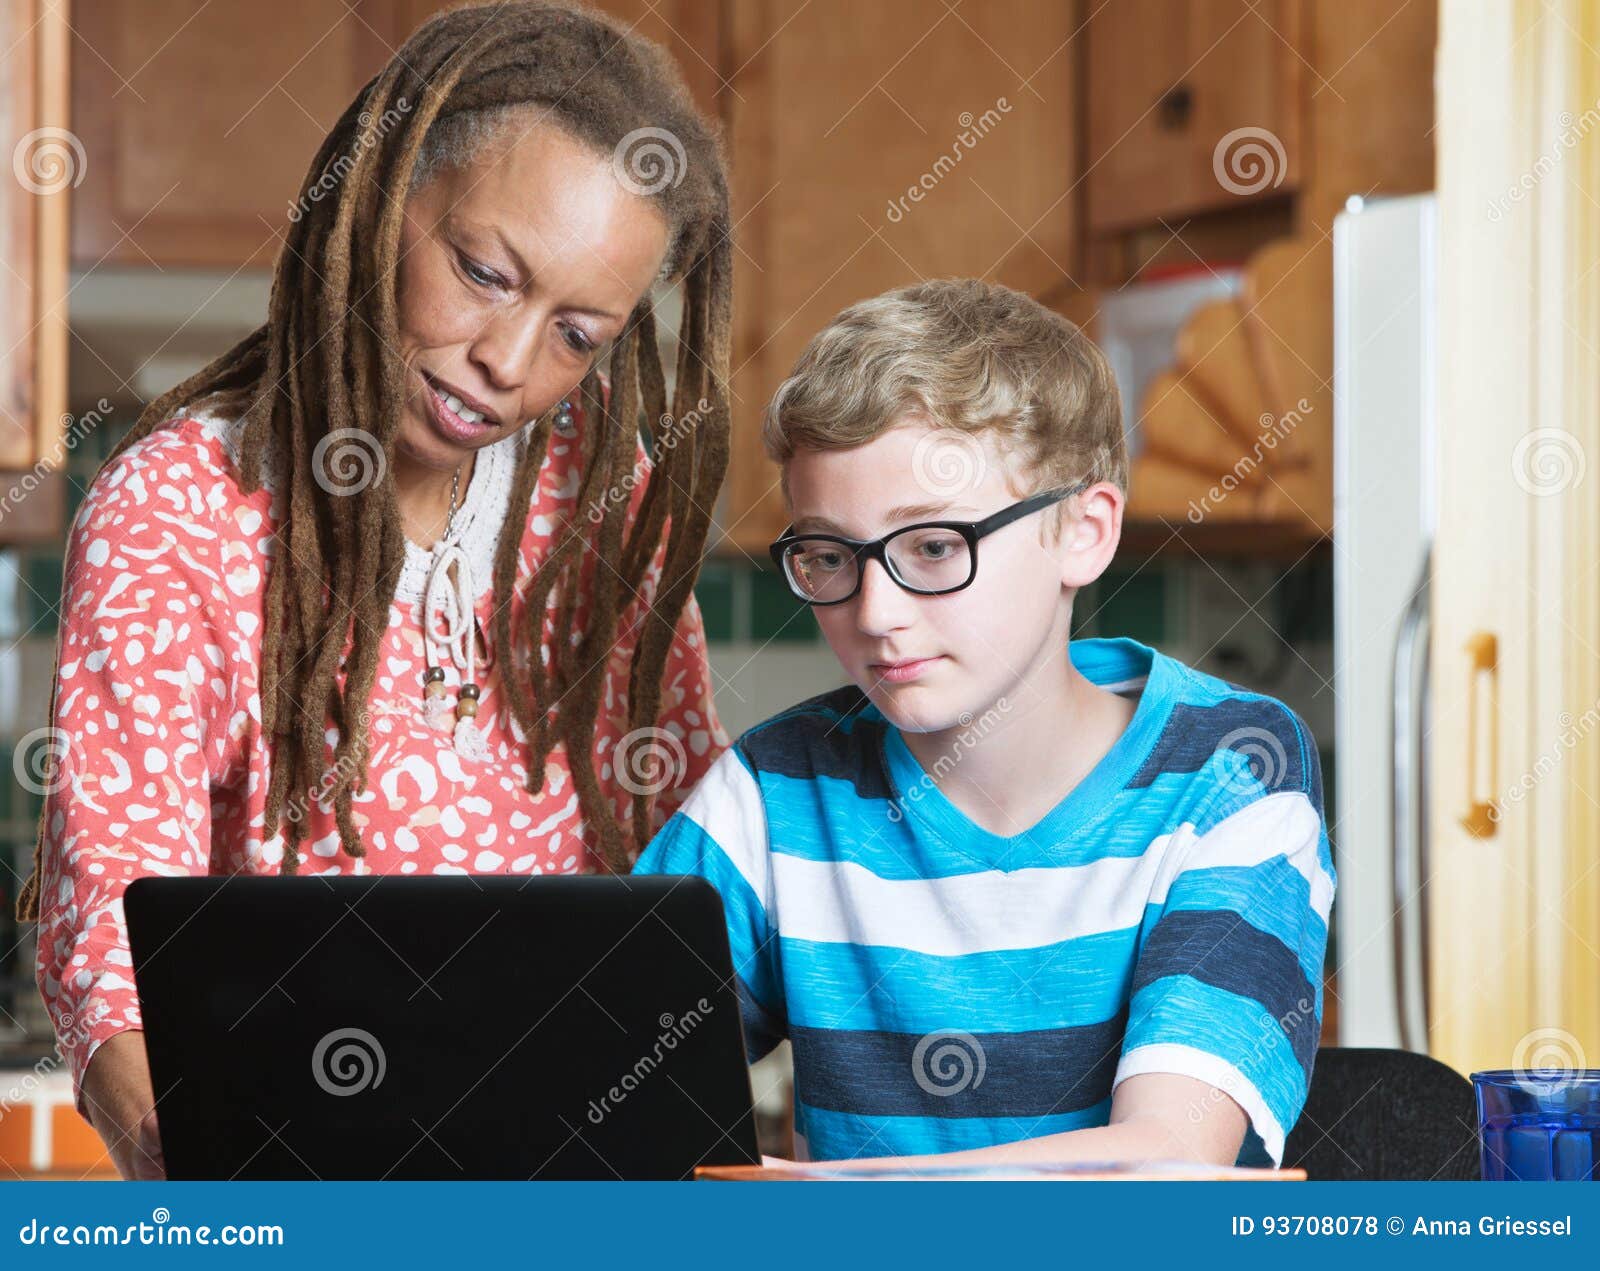 child doing homework with foster parent in kitchen